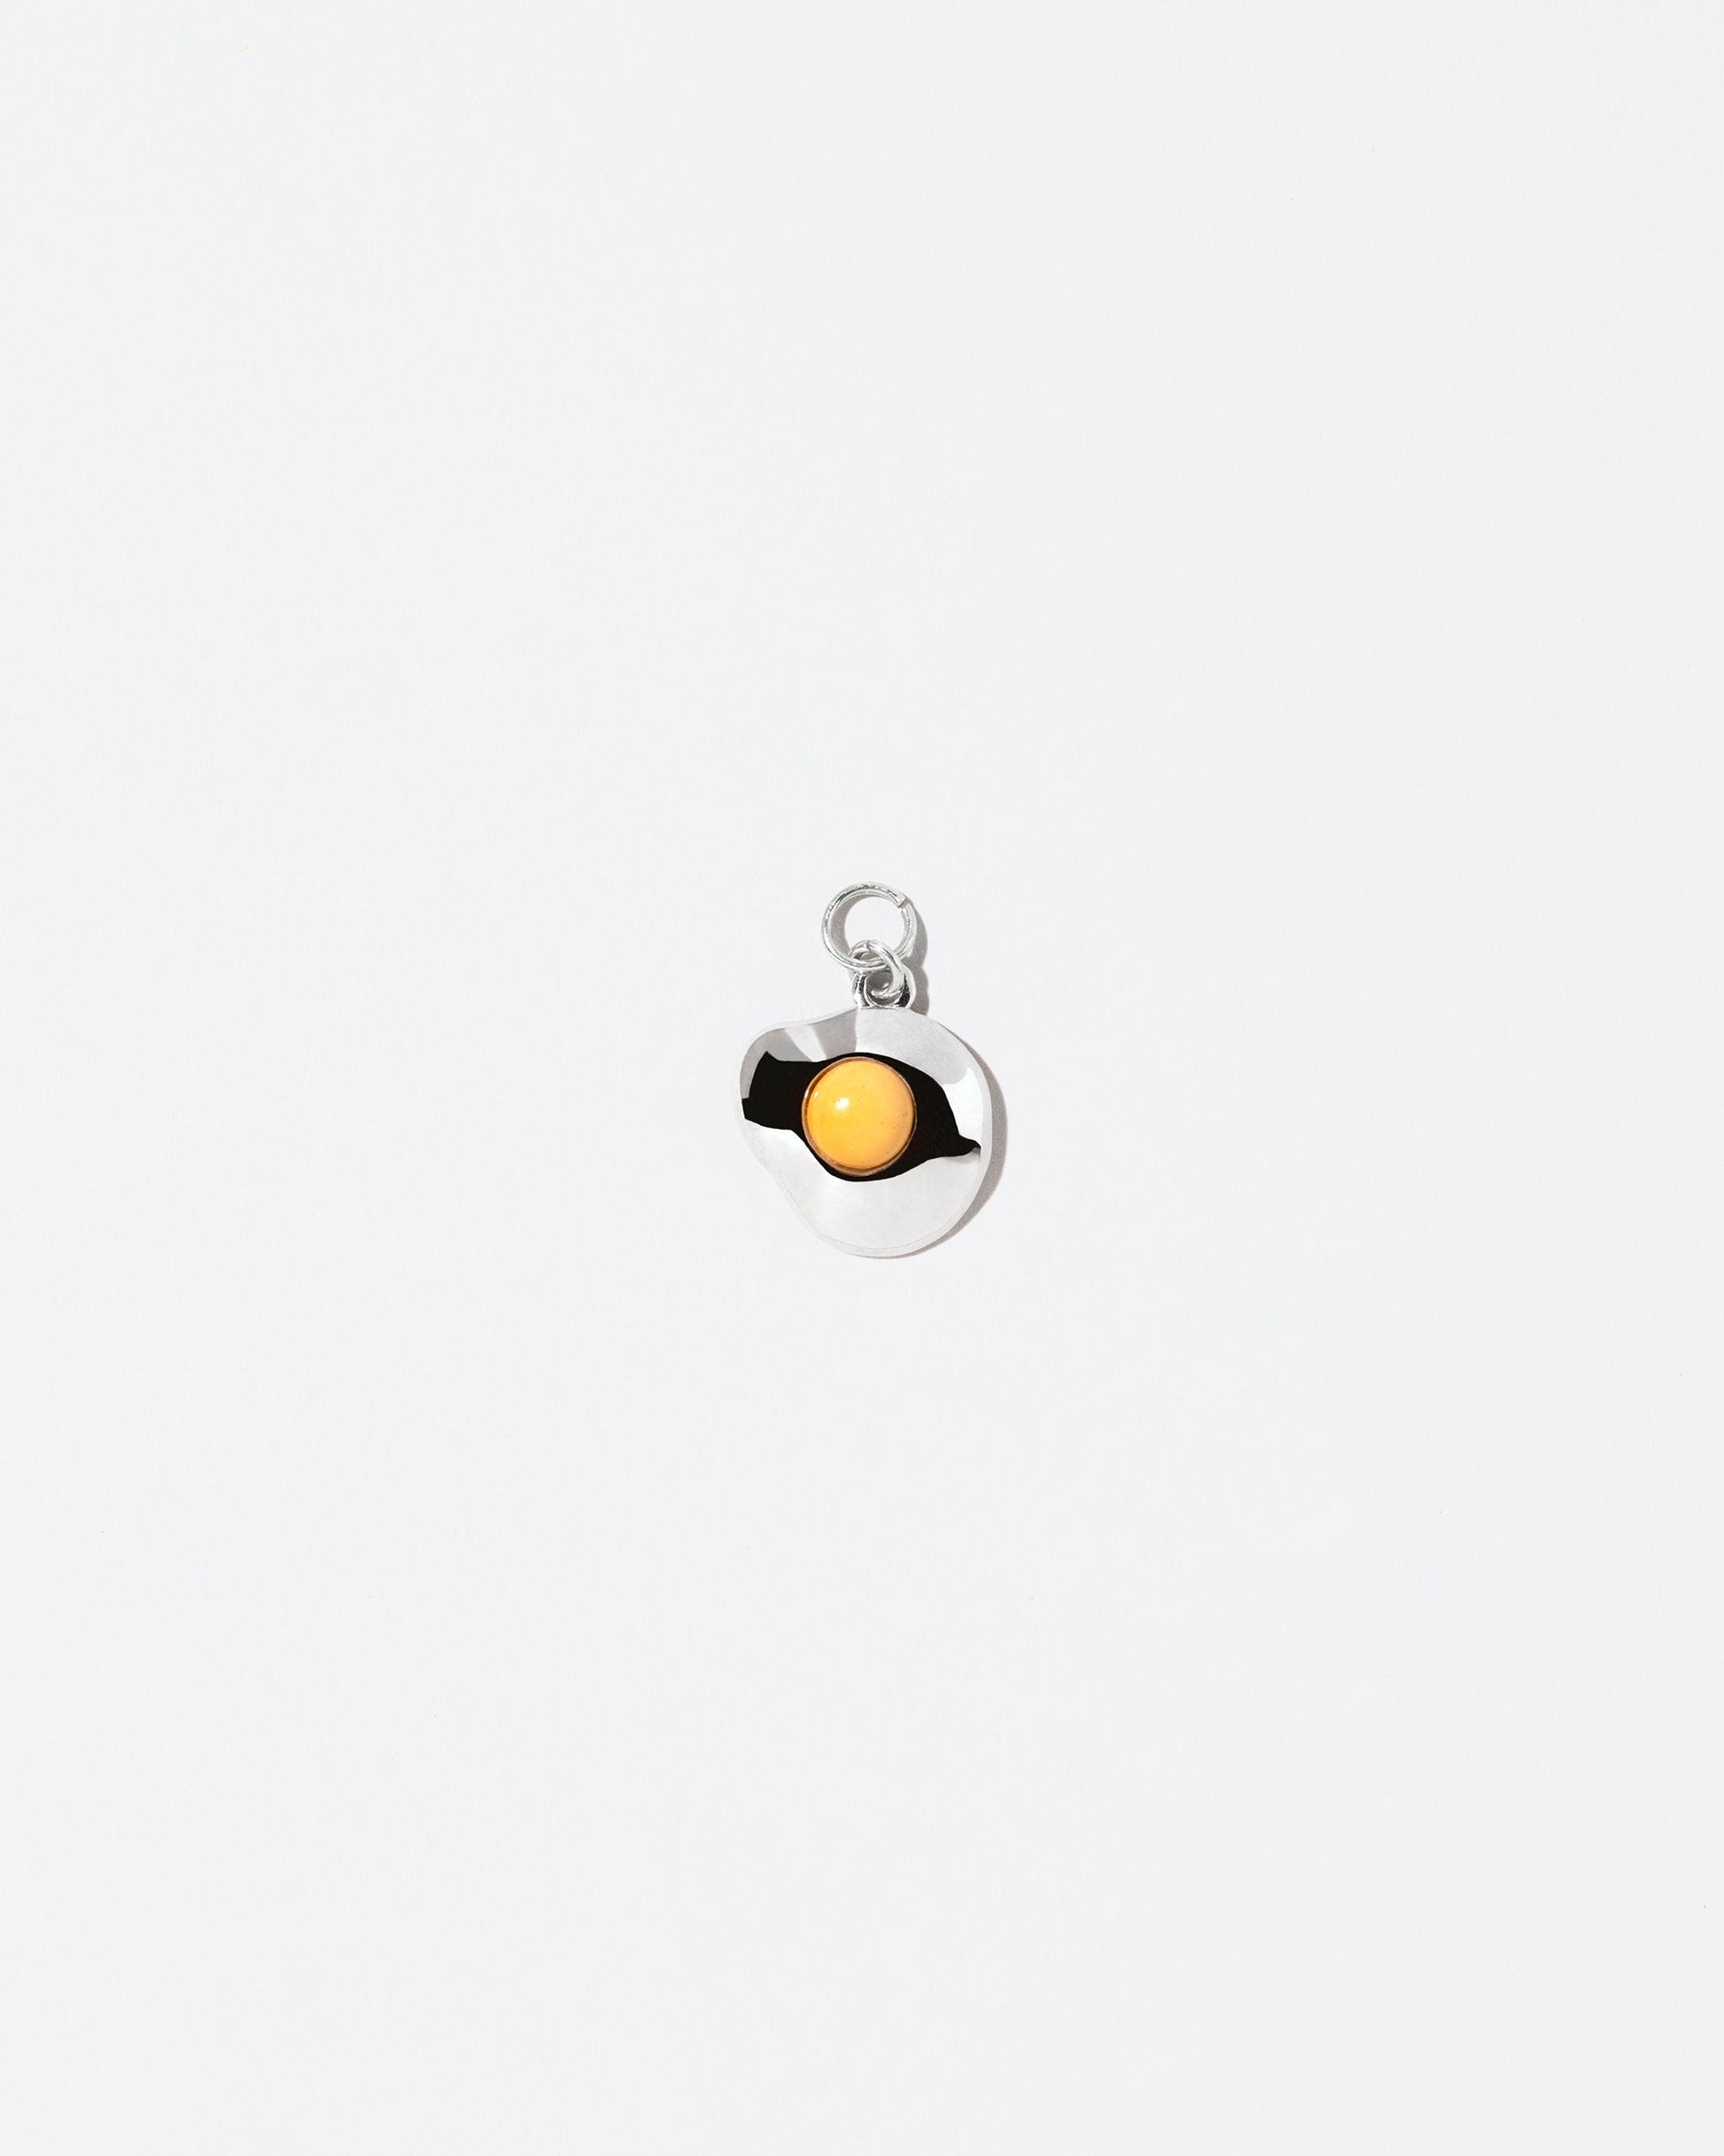 Sunny Side Up Egg Charm Four on light colored background.